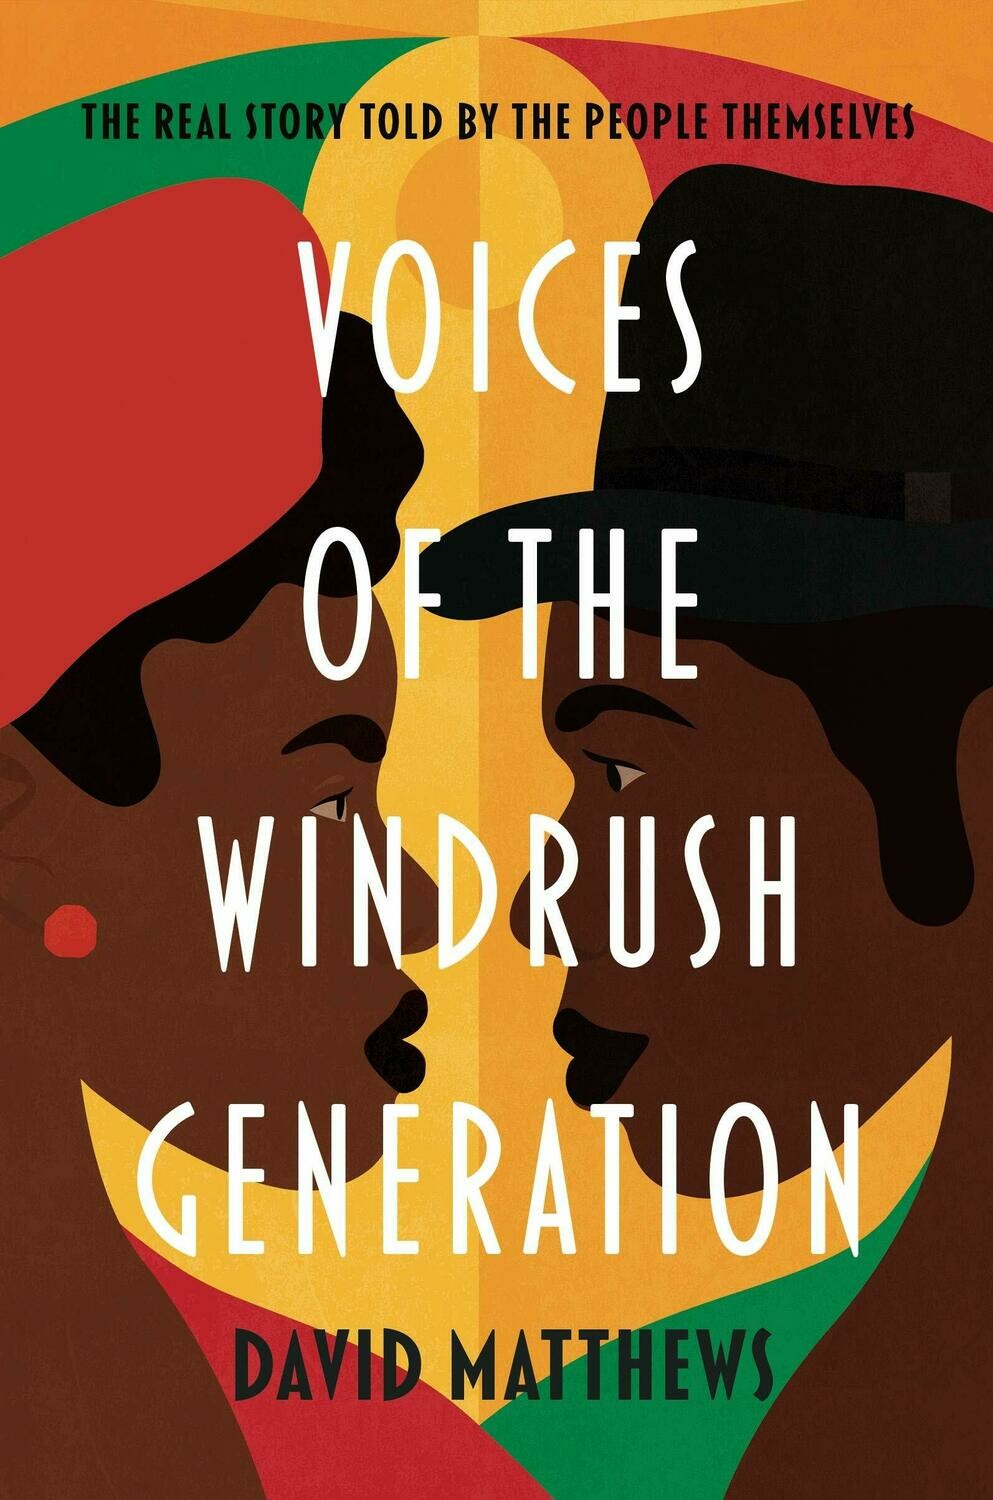 Voices of the Windrush Generation: The real story told by the people themselves - David Matthews